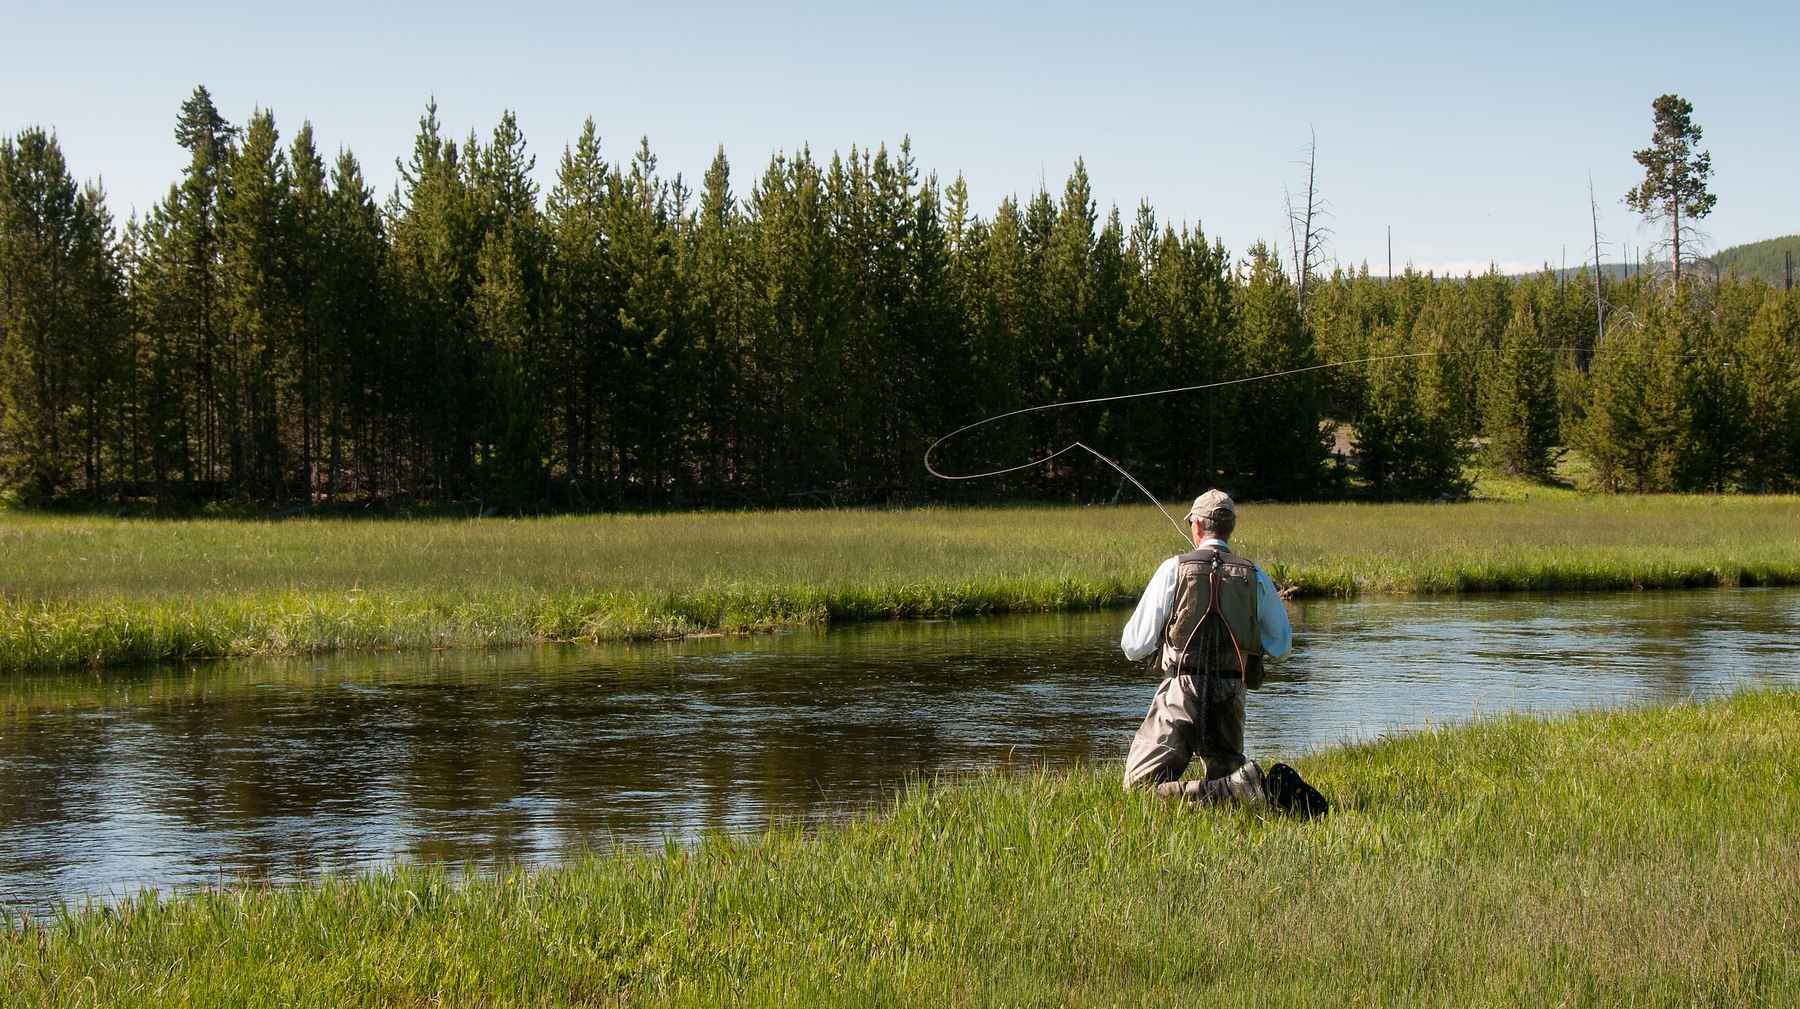 Fly Fishing Rod/Reel Packages Archives - The Missoulian Angler Fly Shop